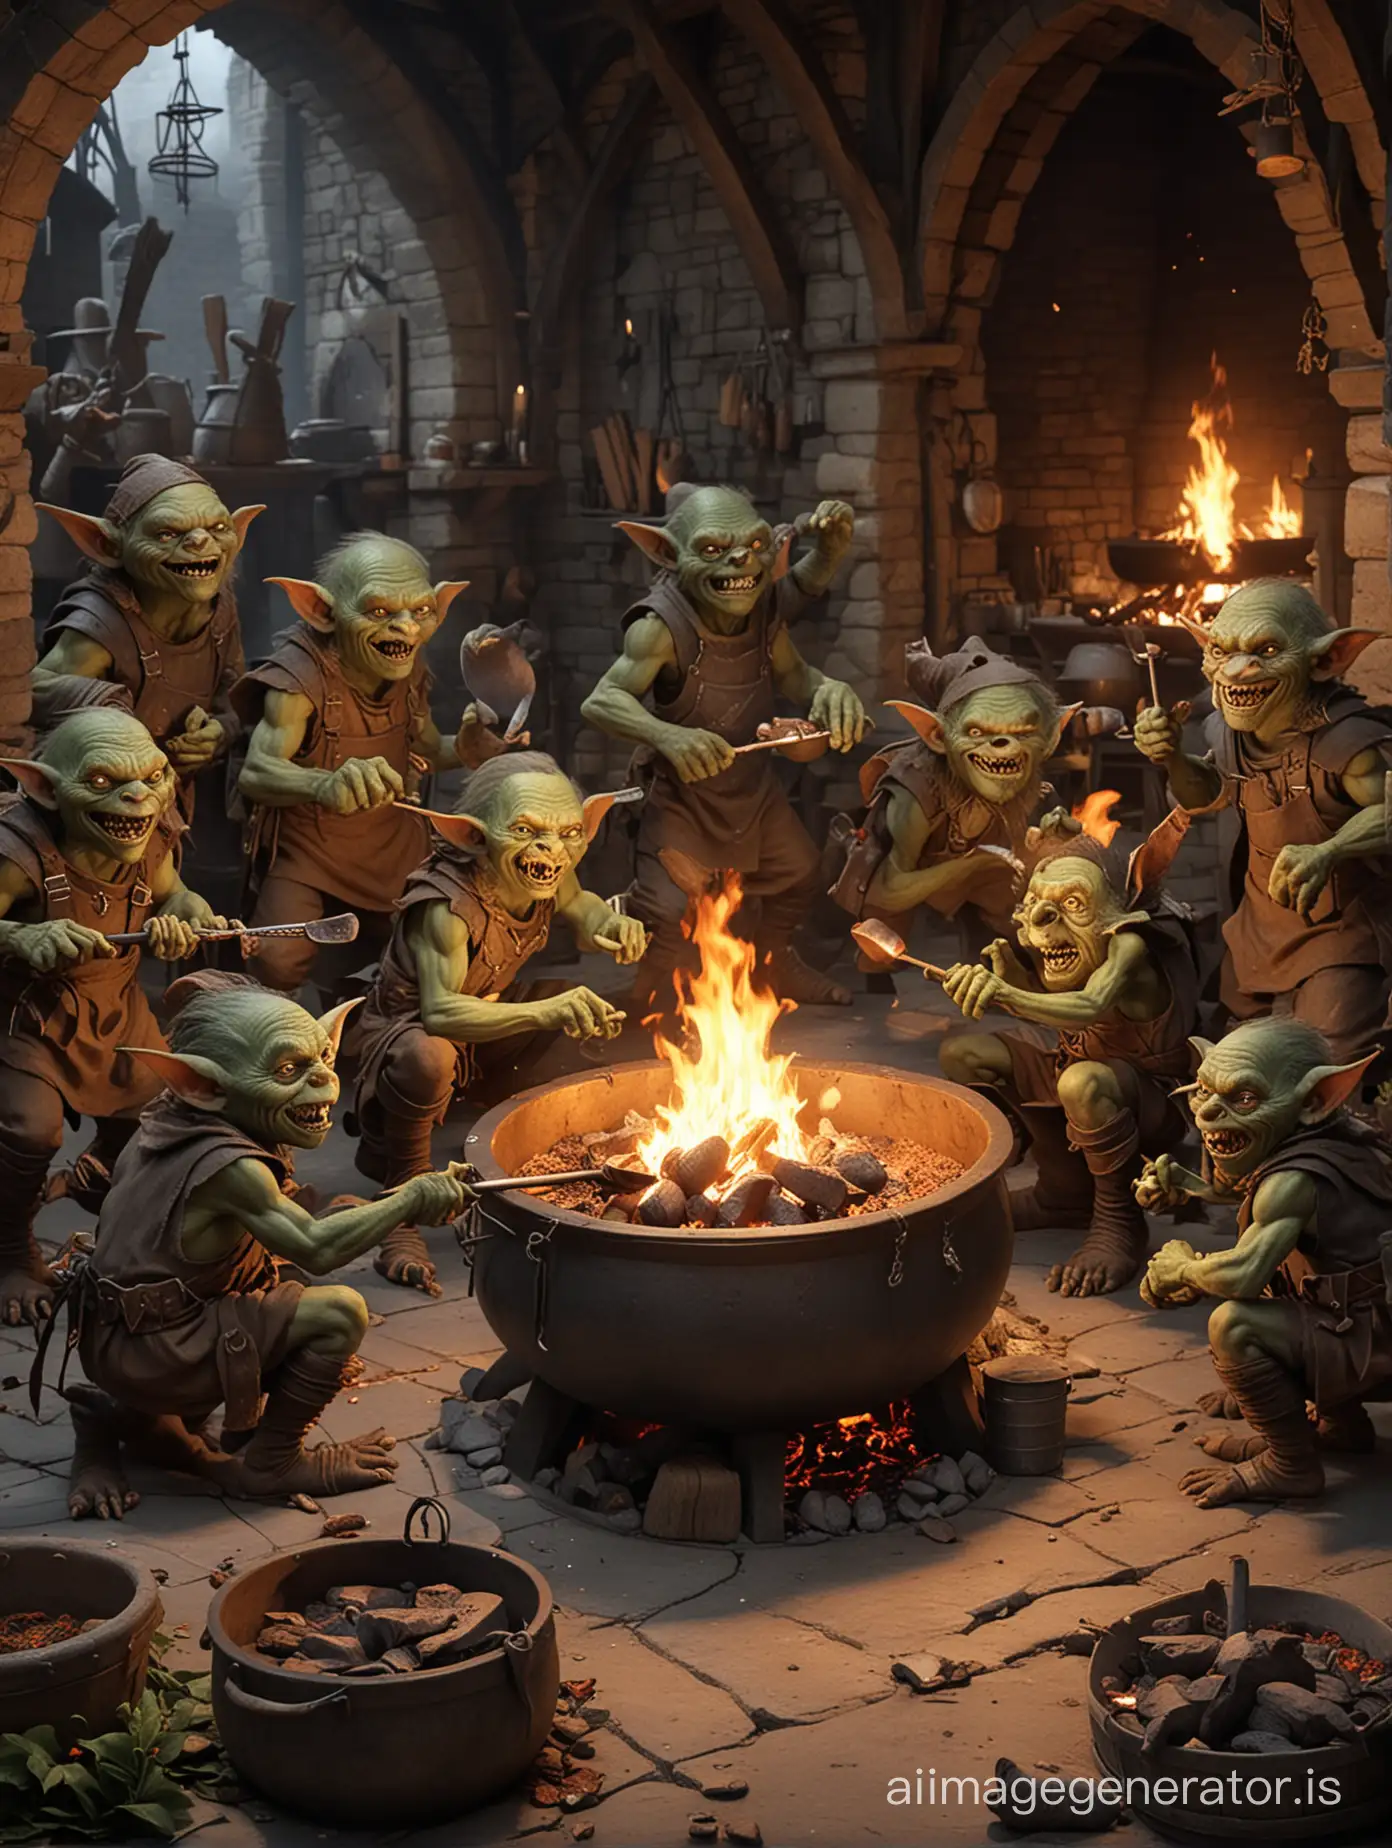 8 goblins in a dining hall. One goblin is cooking with a pot on an open fire pit